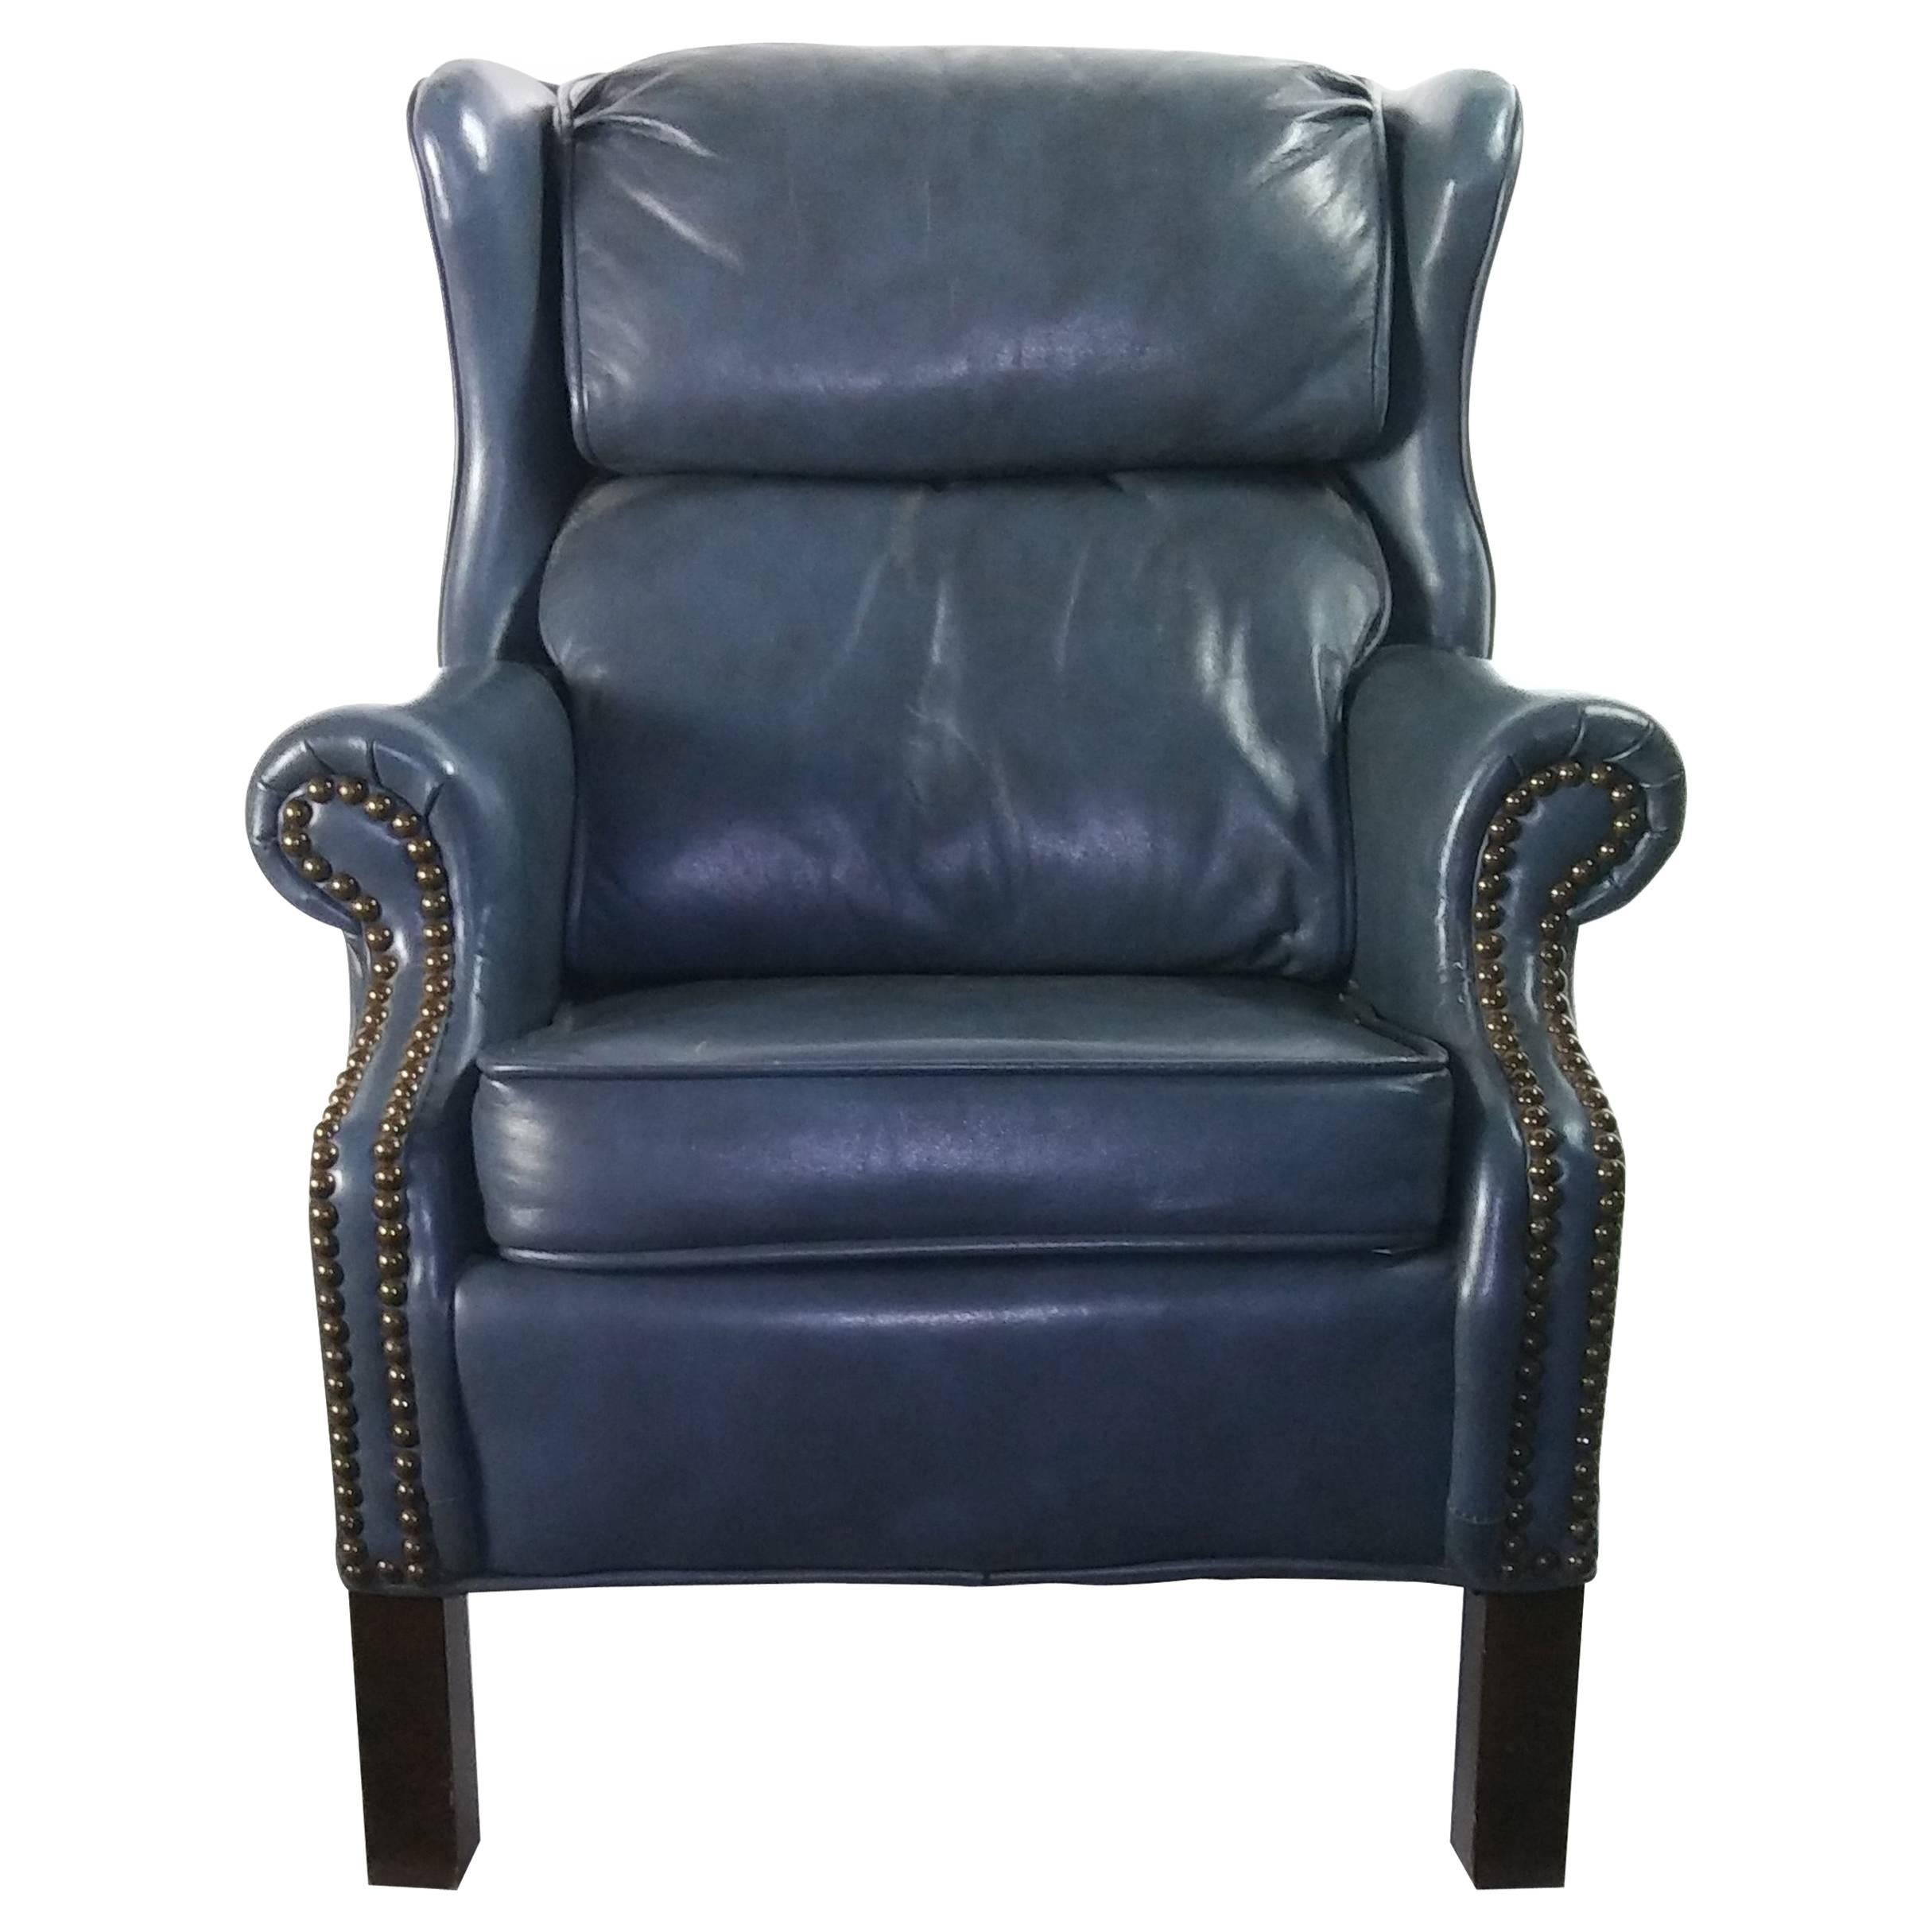 Child's Executive in Training Leather Wing Back Arm Chair by Bradington Young